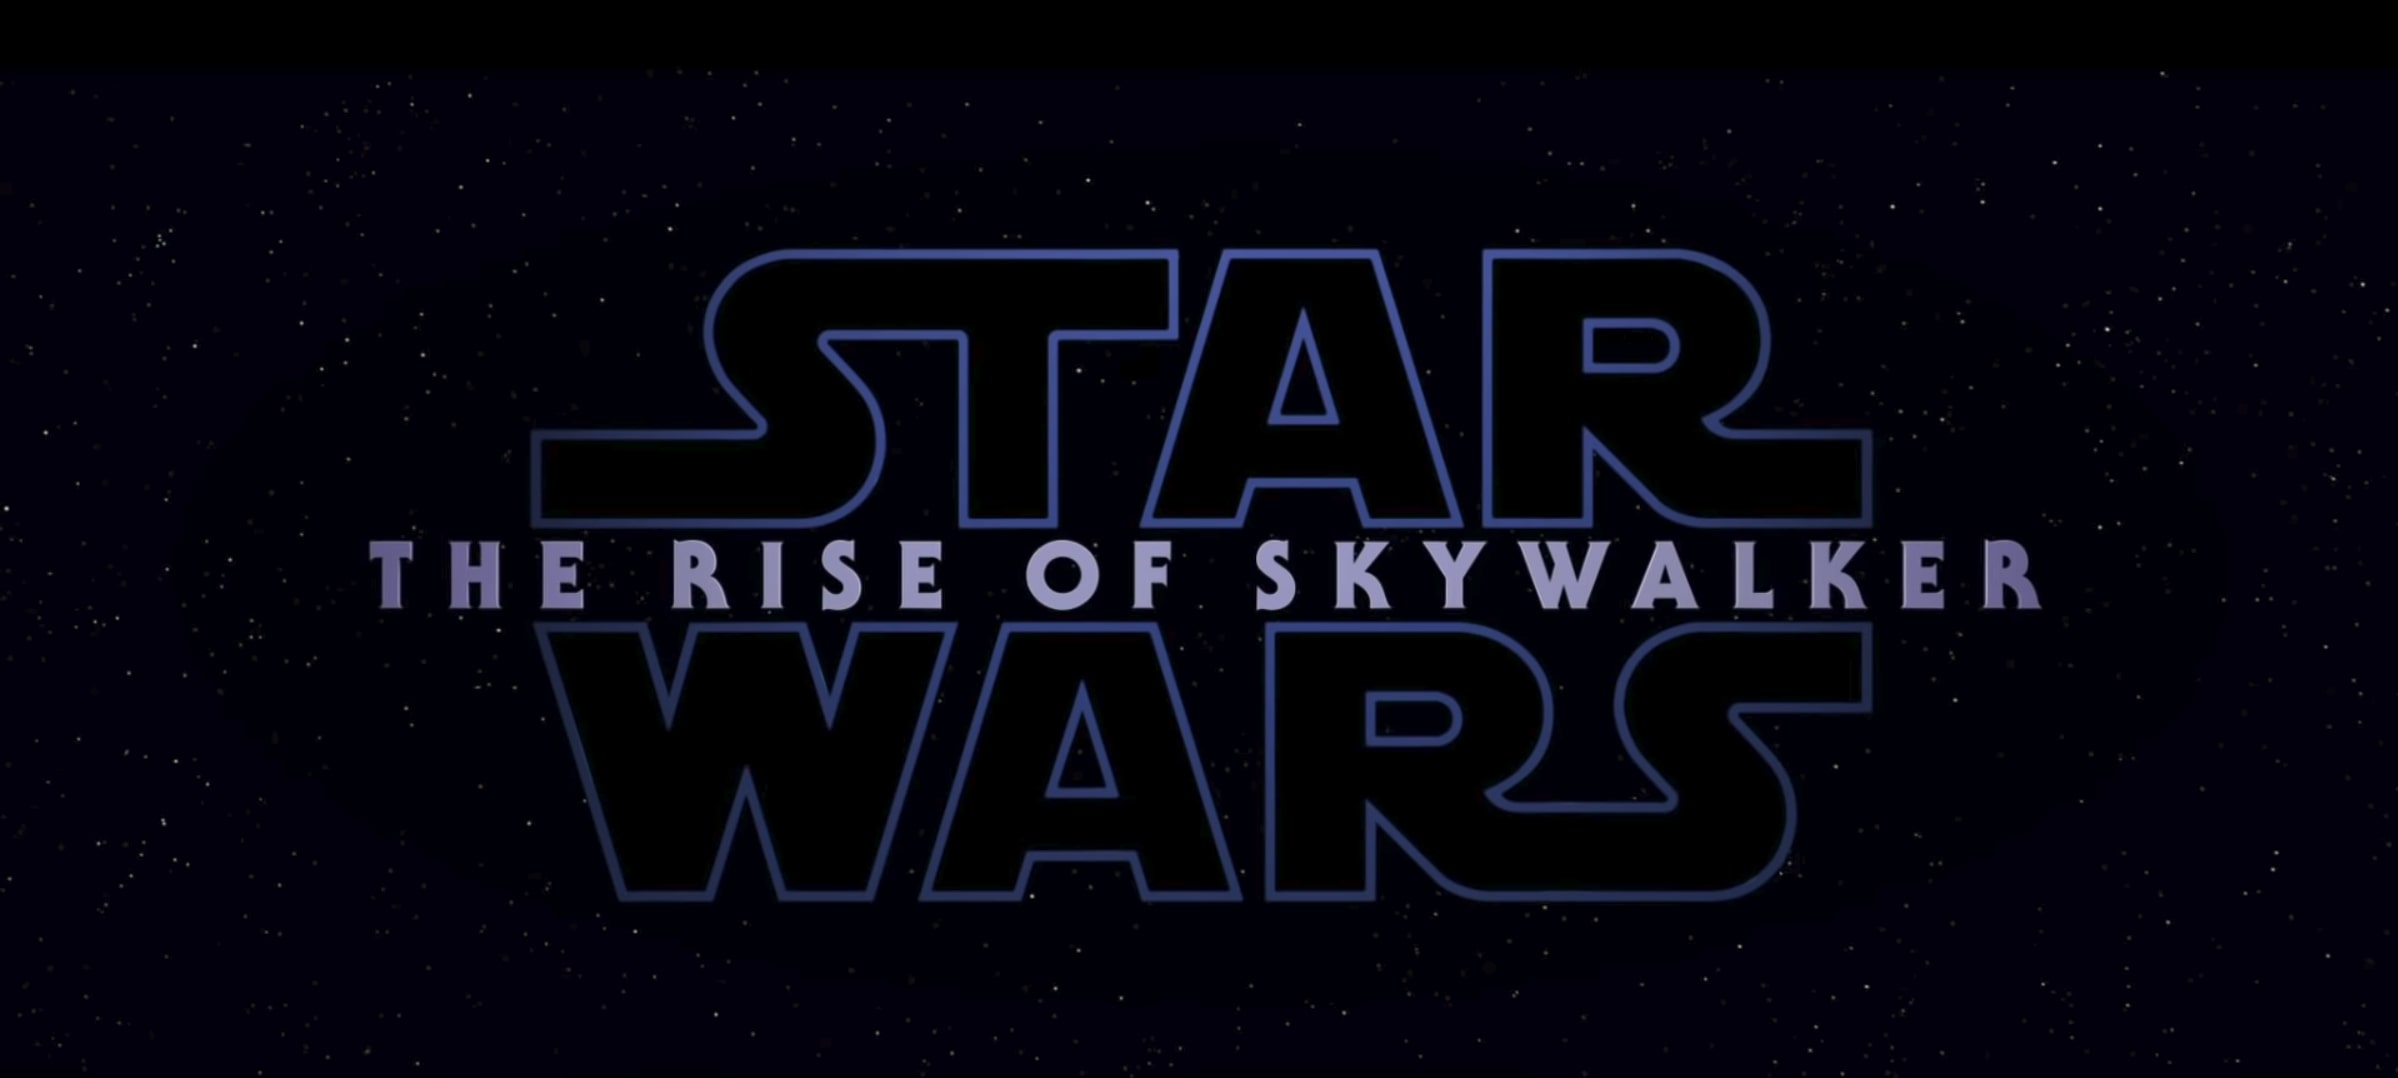 Star Wars: The Rise of Skywalker for ios download